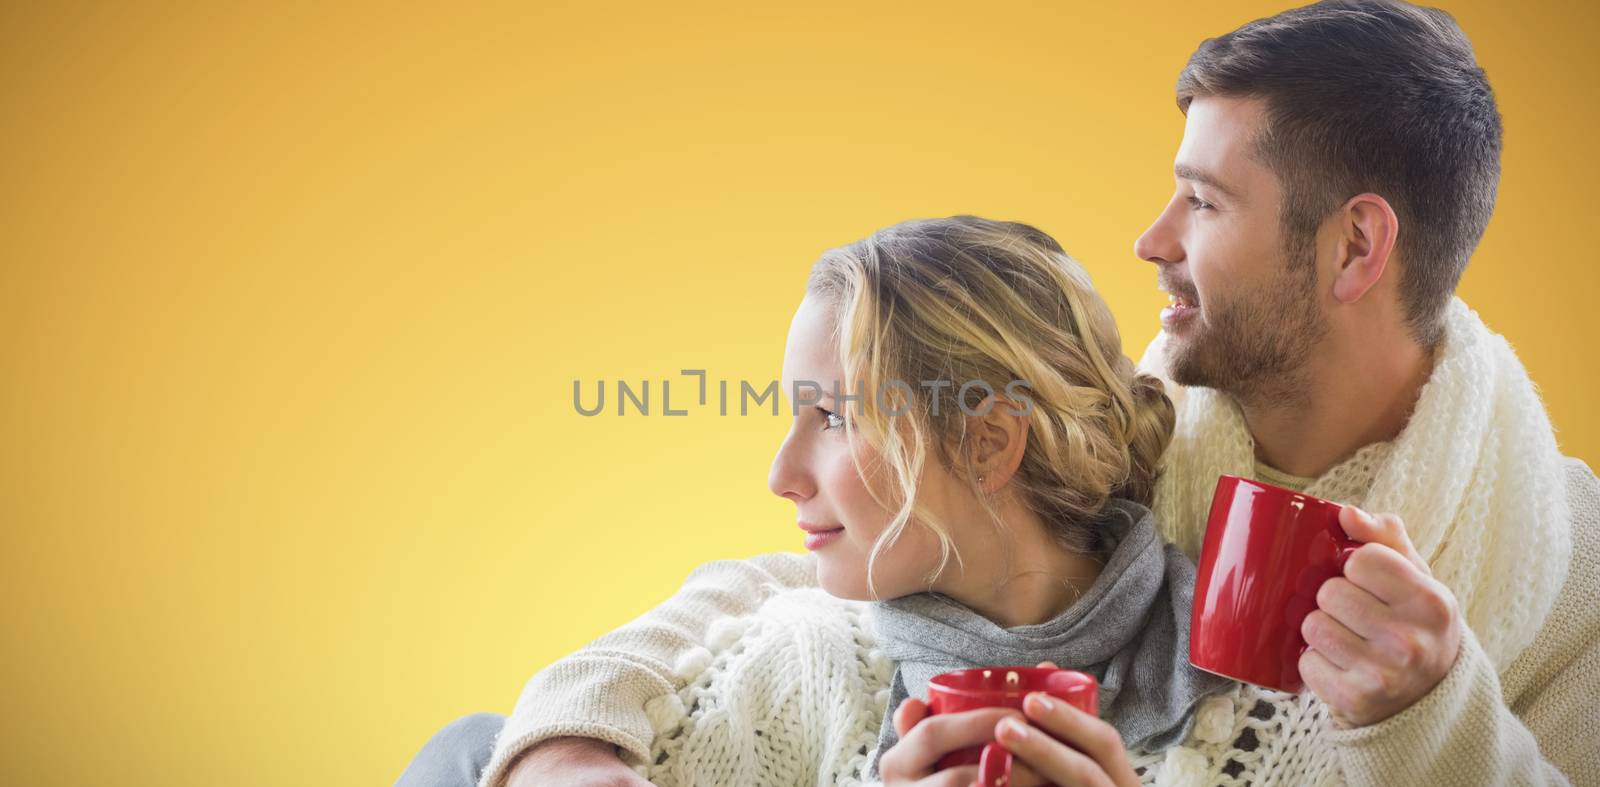  Cheerful couple in winter clothing holding cups against window against abstract yellow background